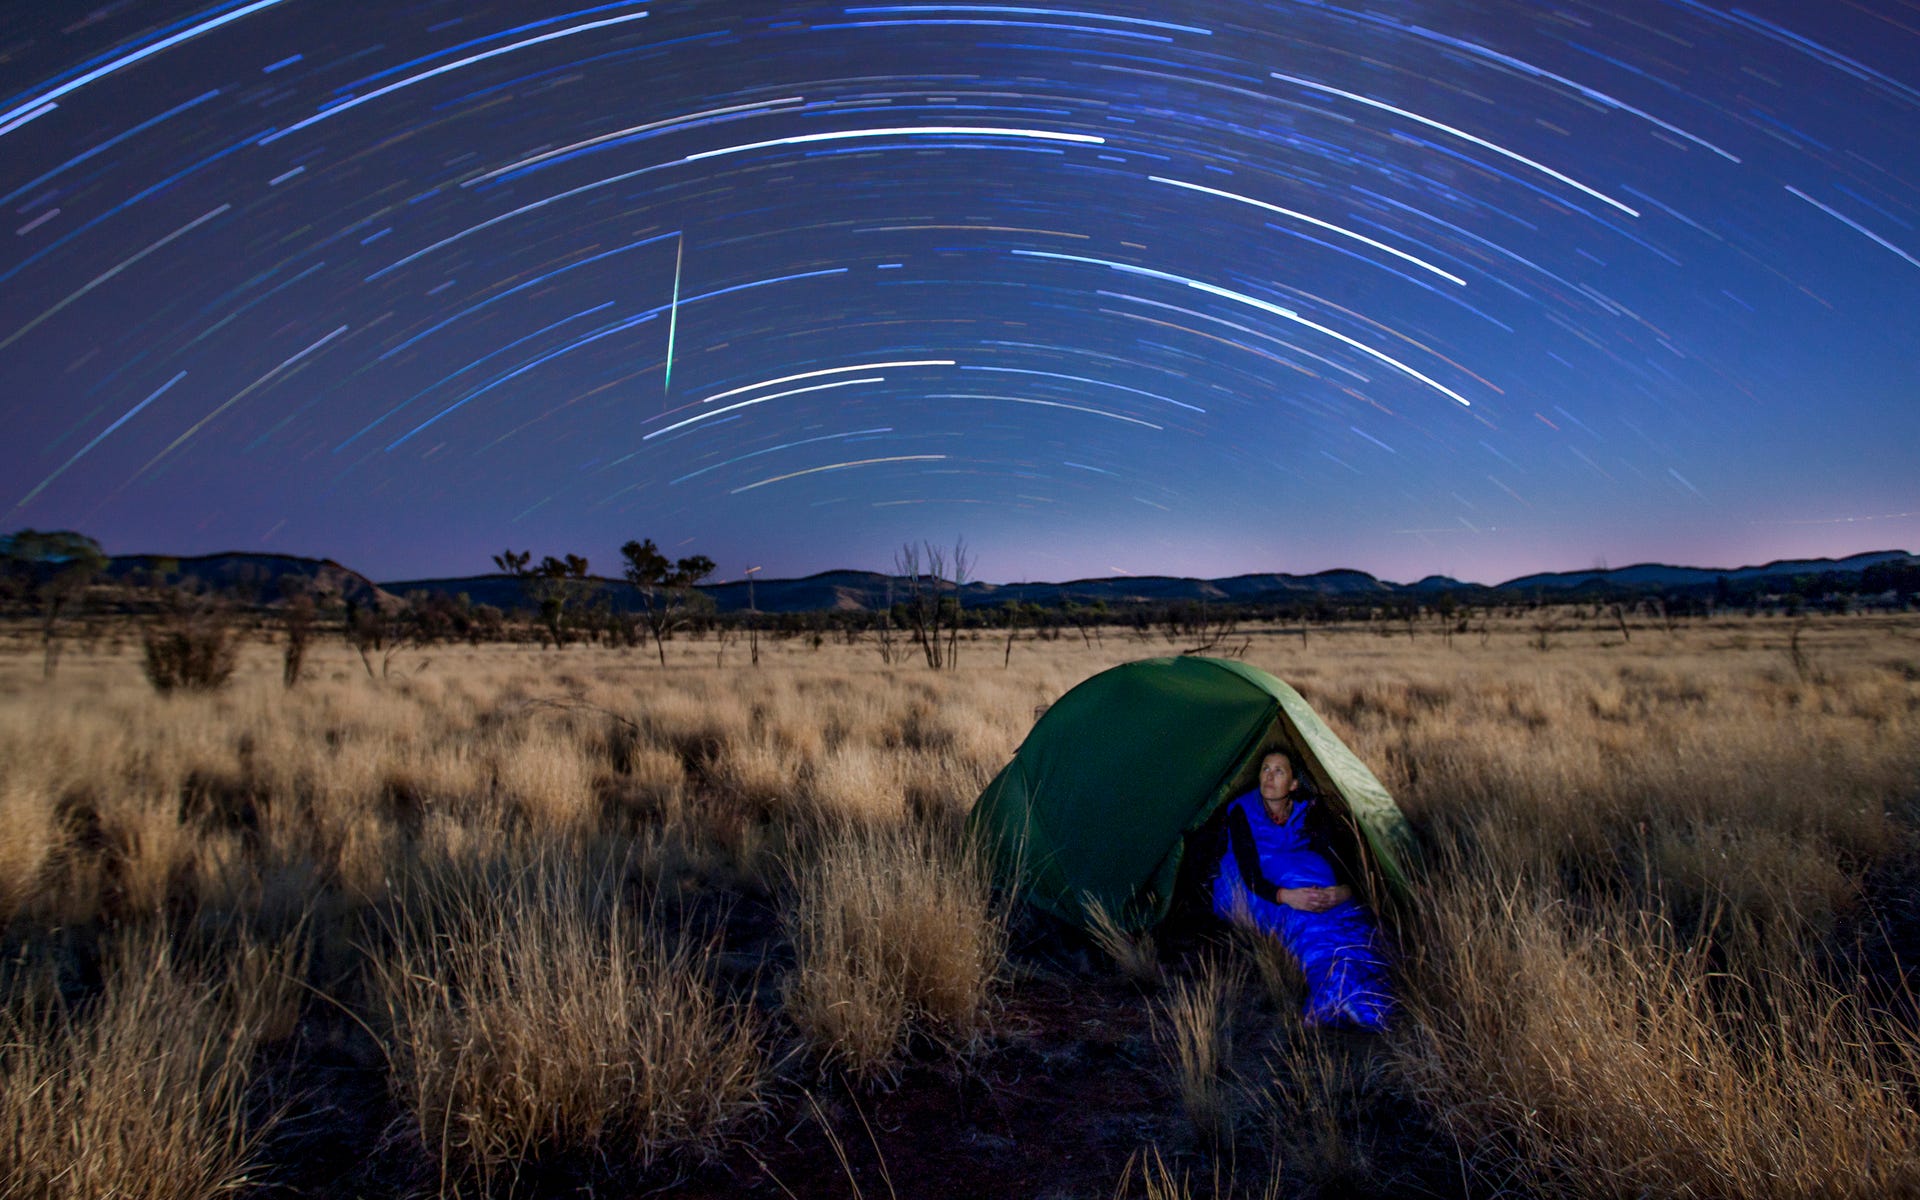 Star_timelapse_over_a_camping_woman_around_Alice_Springs